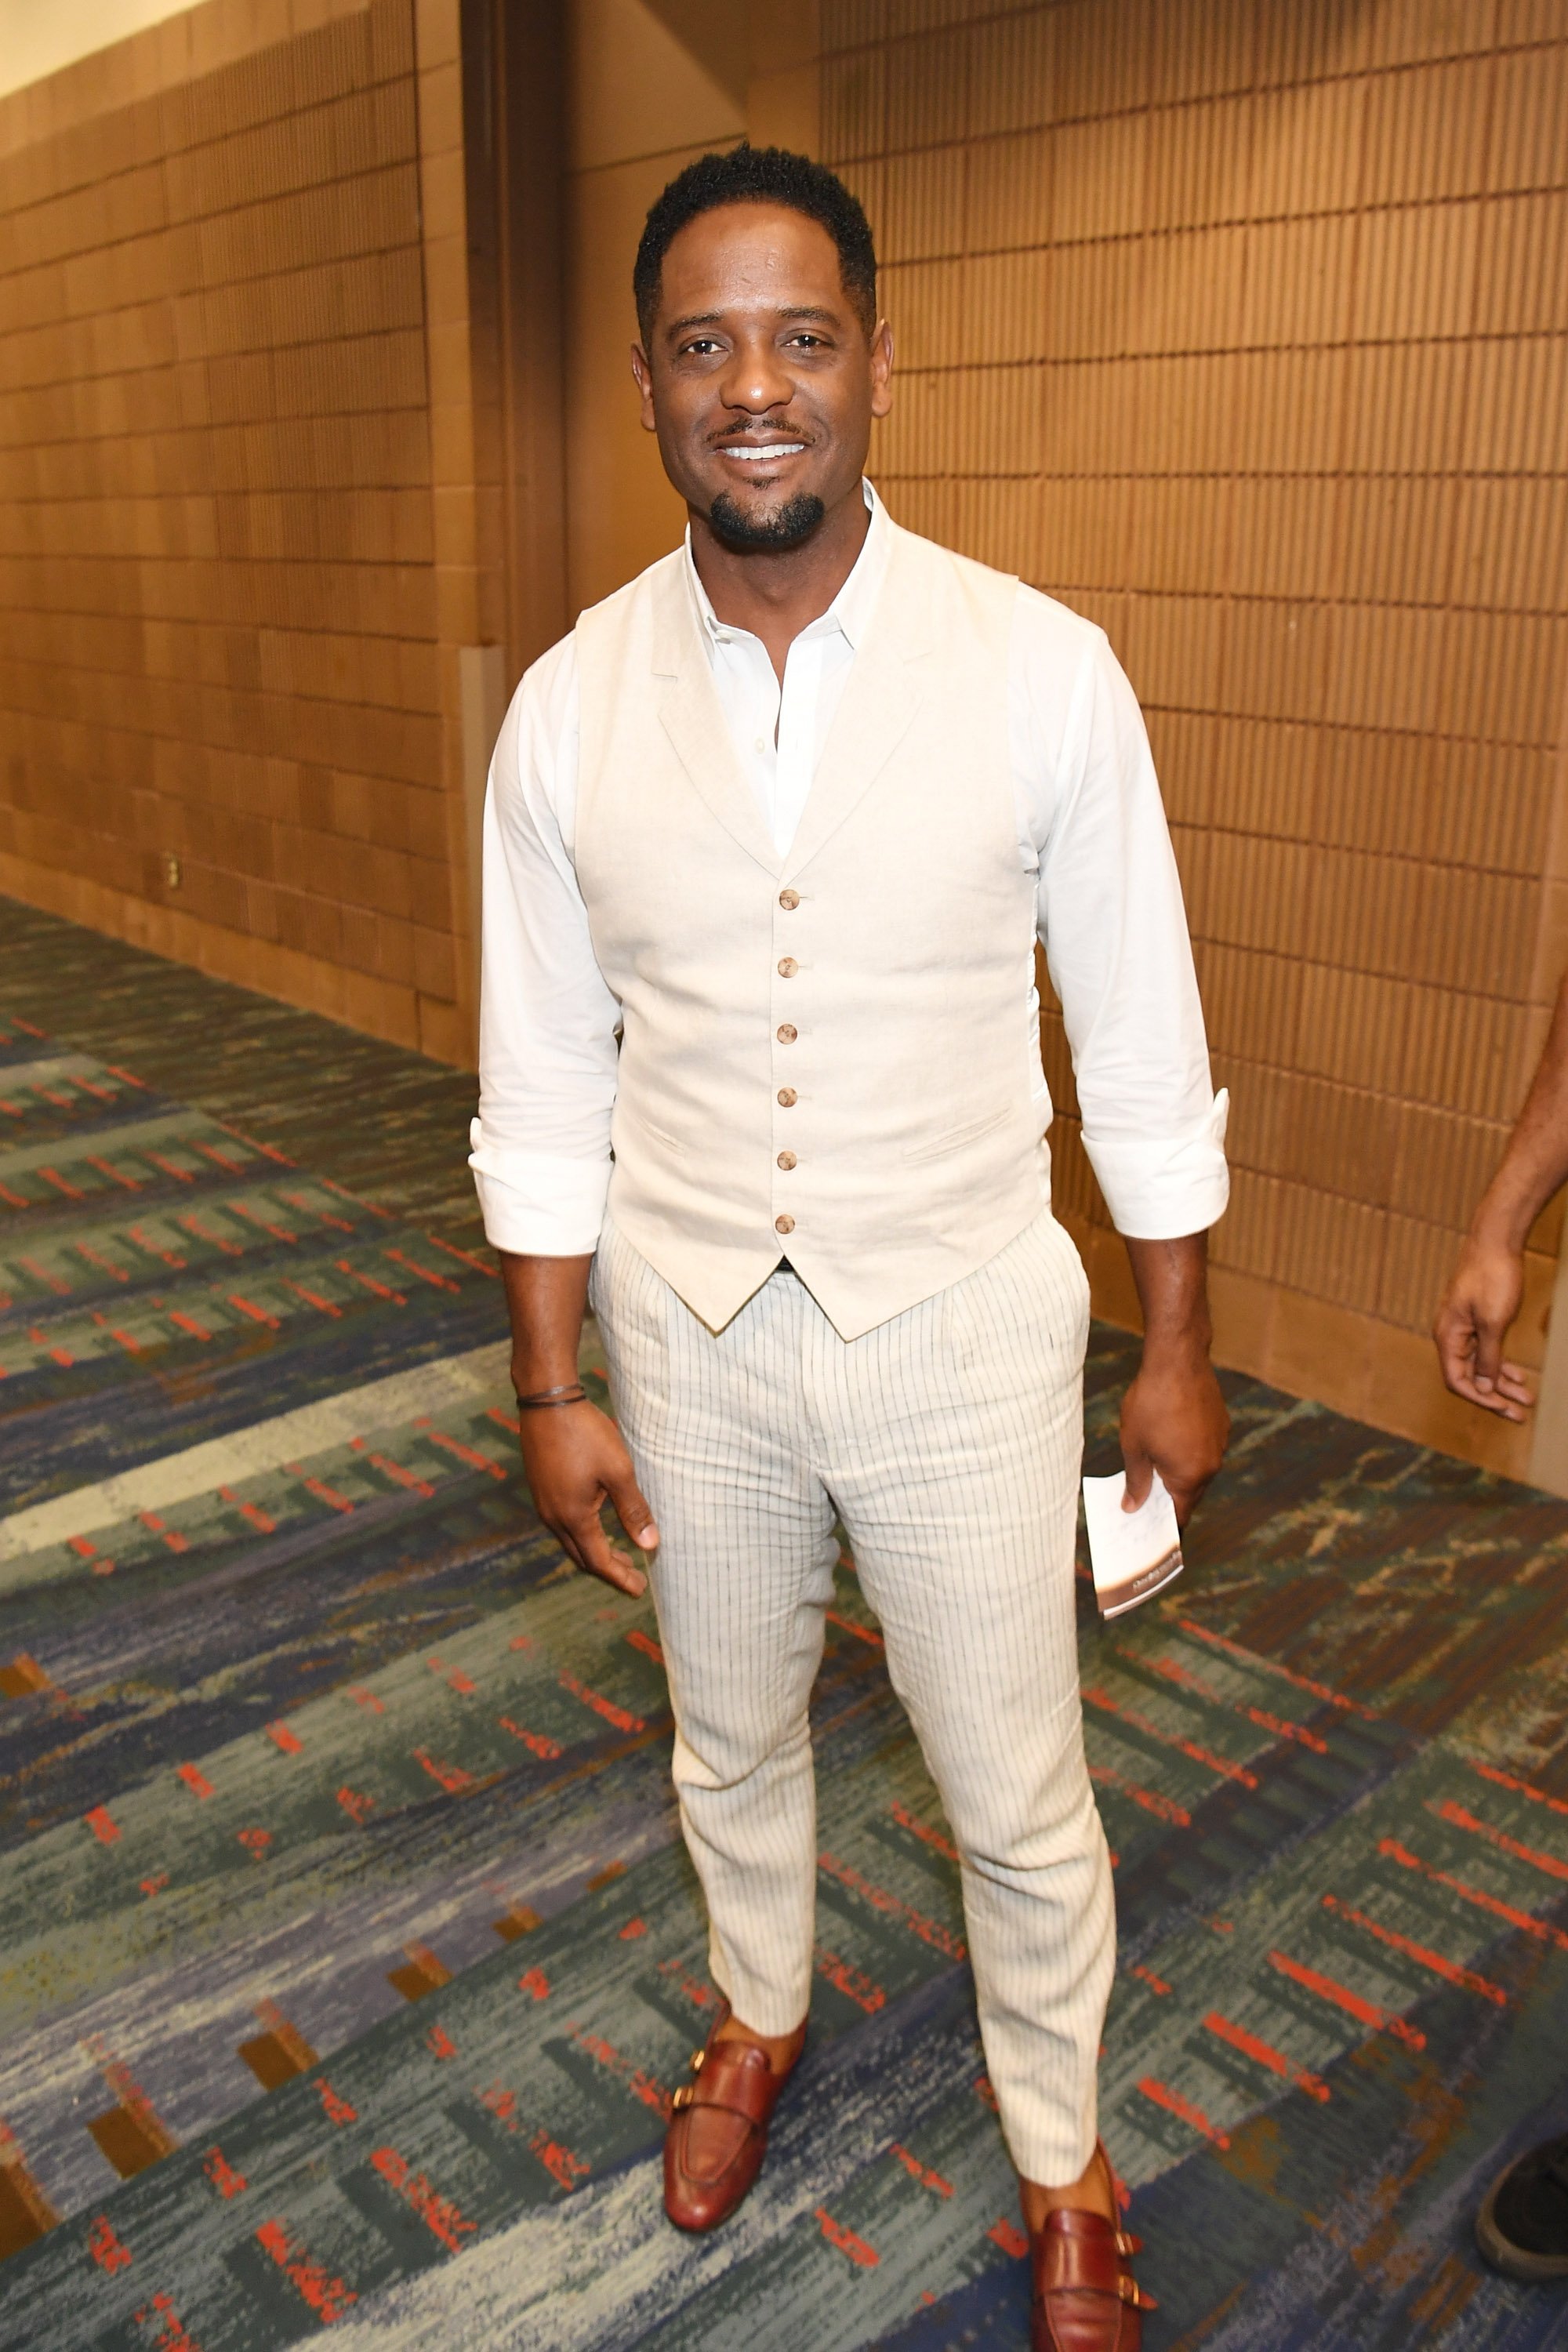 Blair Underwood at the ESSENCE Festival on July 2, 2017 in Louisiana | Photo: Getty Images